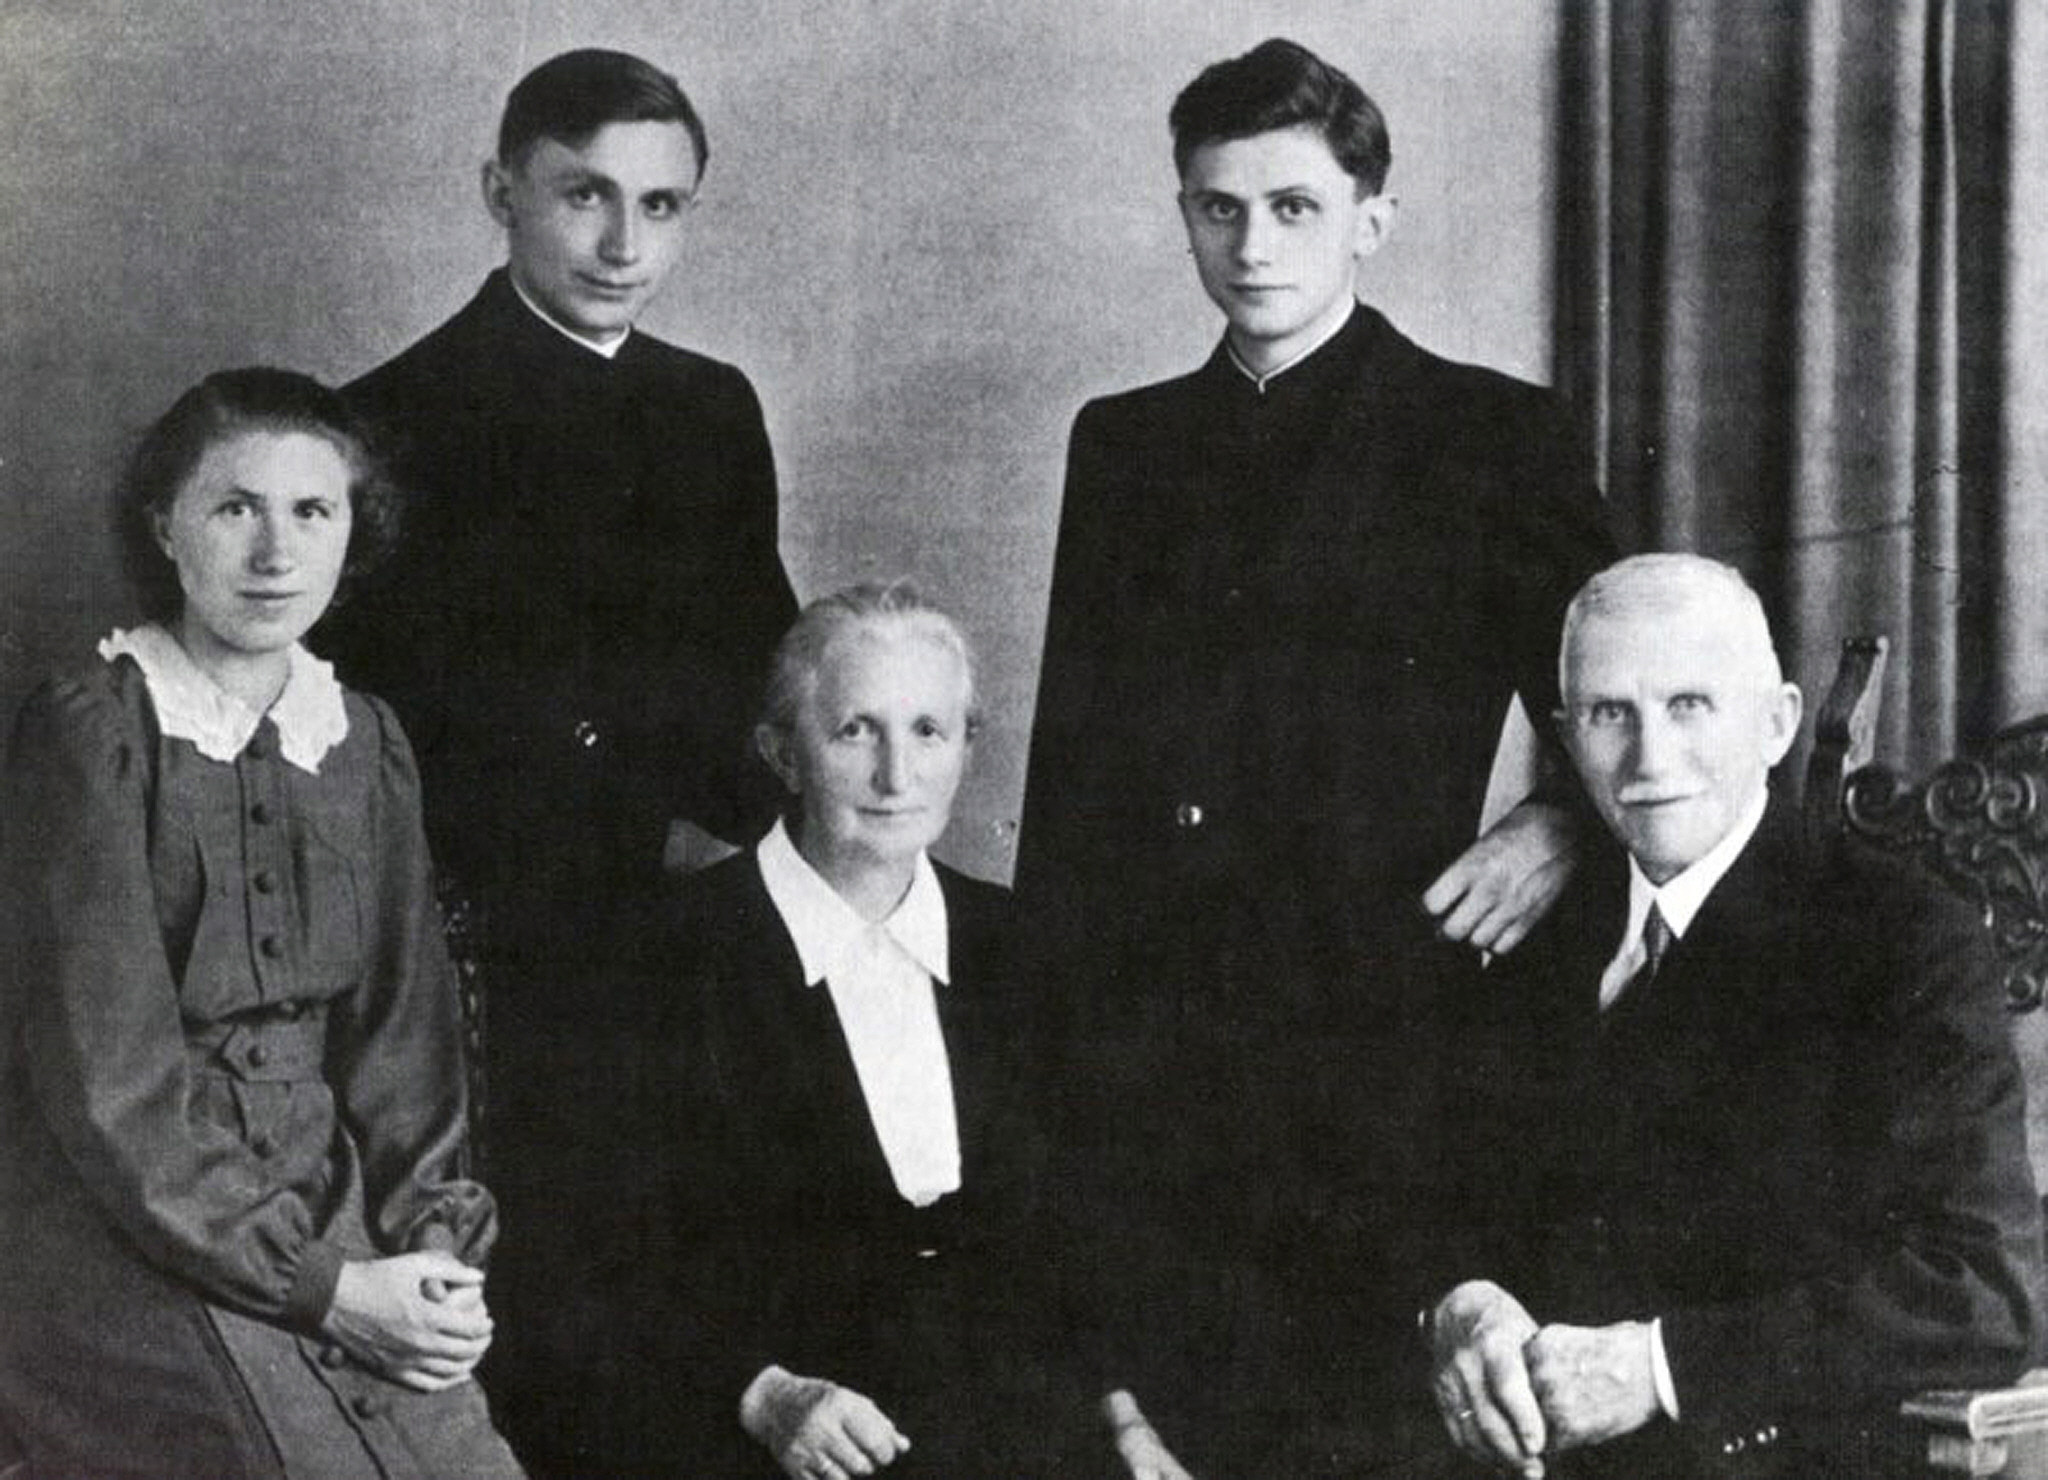 Picture taken in 1951 shows the family of Josef Ratzinger (up, R) in Freising, Bavaria, after the ordination of himself and his brother Georg (up L). Germany's Cardinal Joseph Ratzinger was elected the 265th pope of the Roman Catholic Church on 19 April 2005 and will take the name Benedict XVI, the Vatican announced. Bottom row : his sister Maria, his Mother Maria and his father Josef.